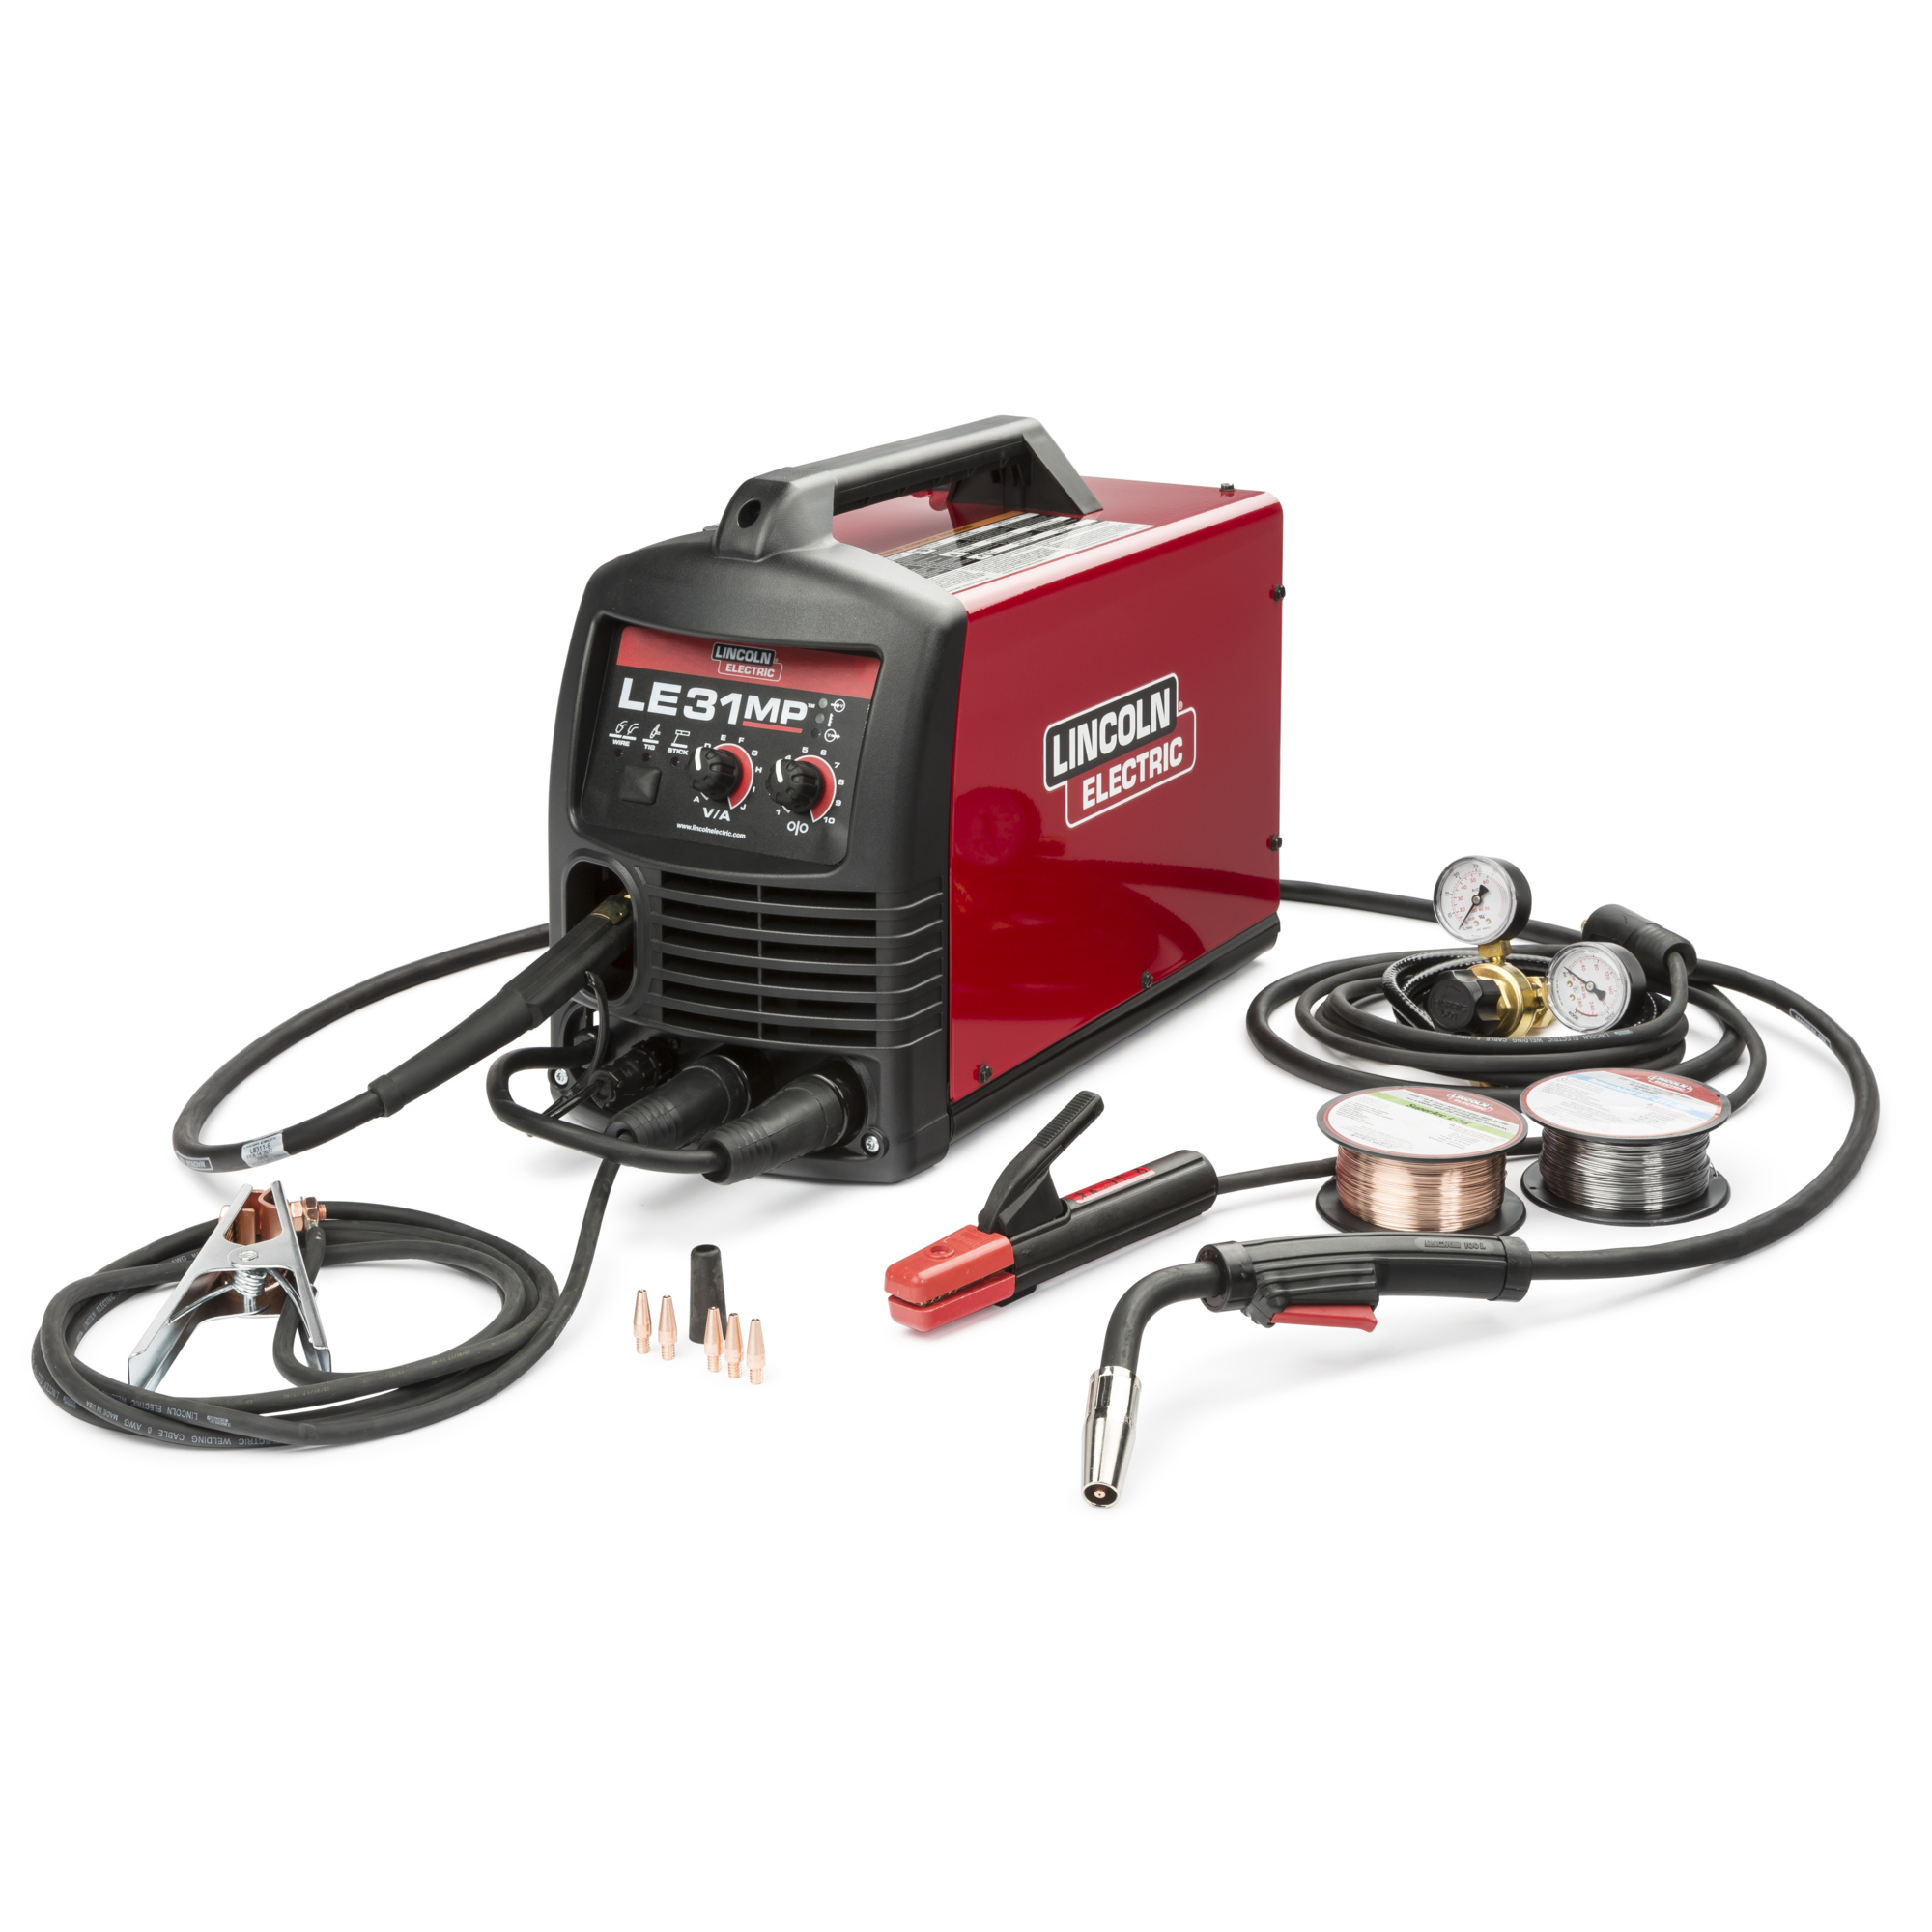 Lincoln Electric LE31MP MIG/Flux-Core Welder with Multi Processes, Transformer, MIG, Flux-Cored, Arc and TIG, 120V, 80-140 Amp Output, Model K3461-1